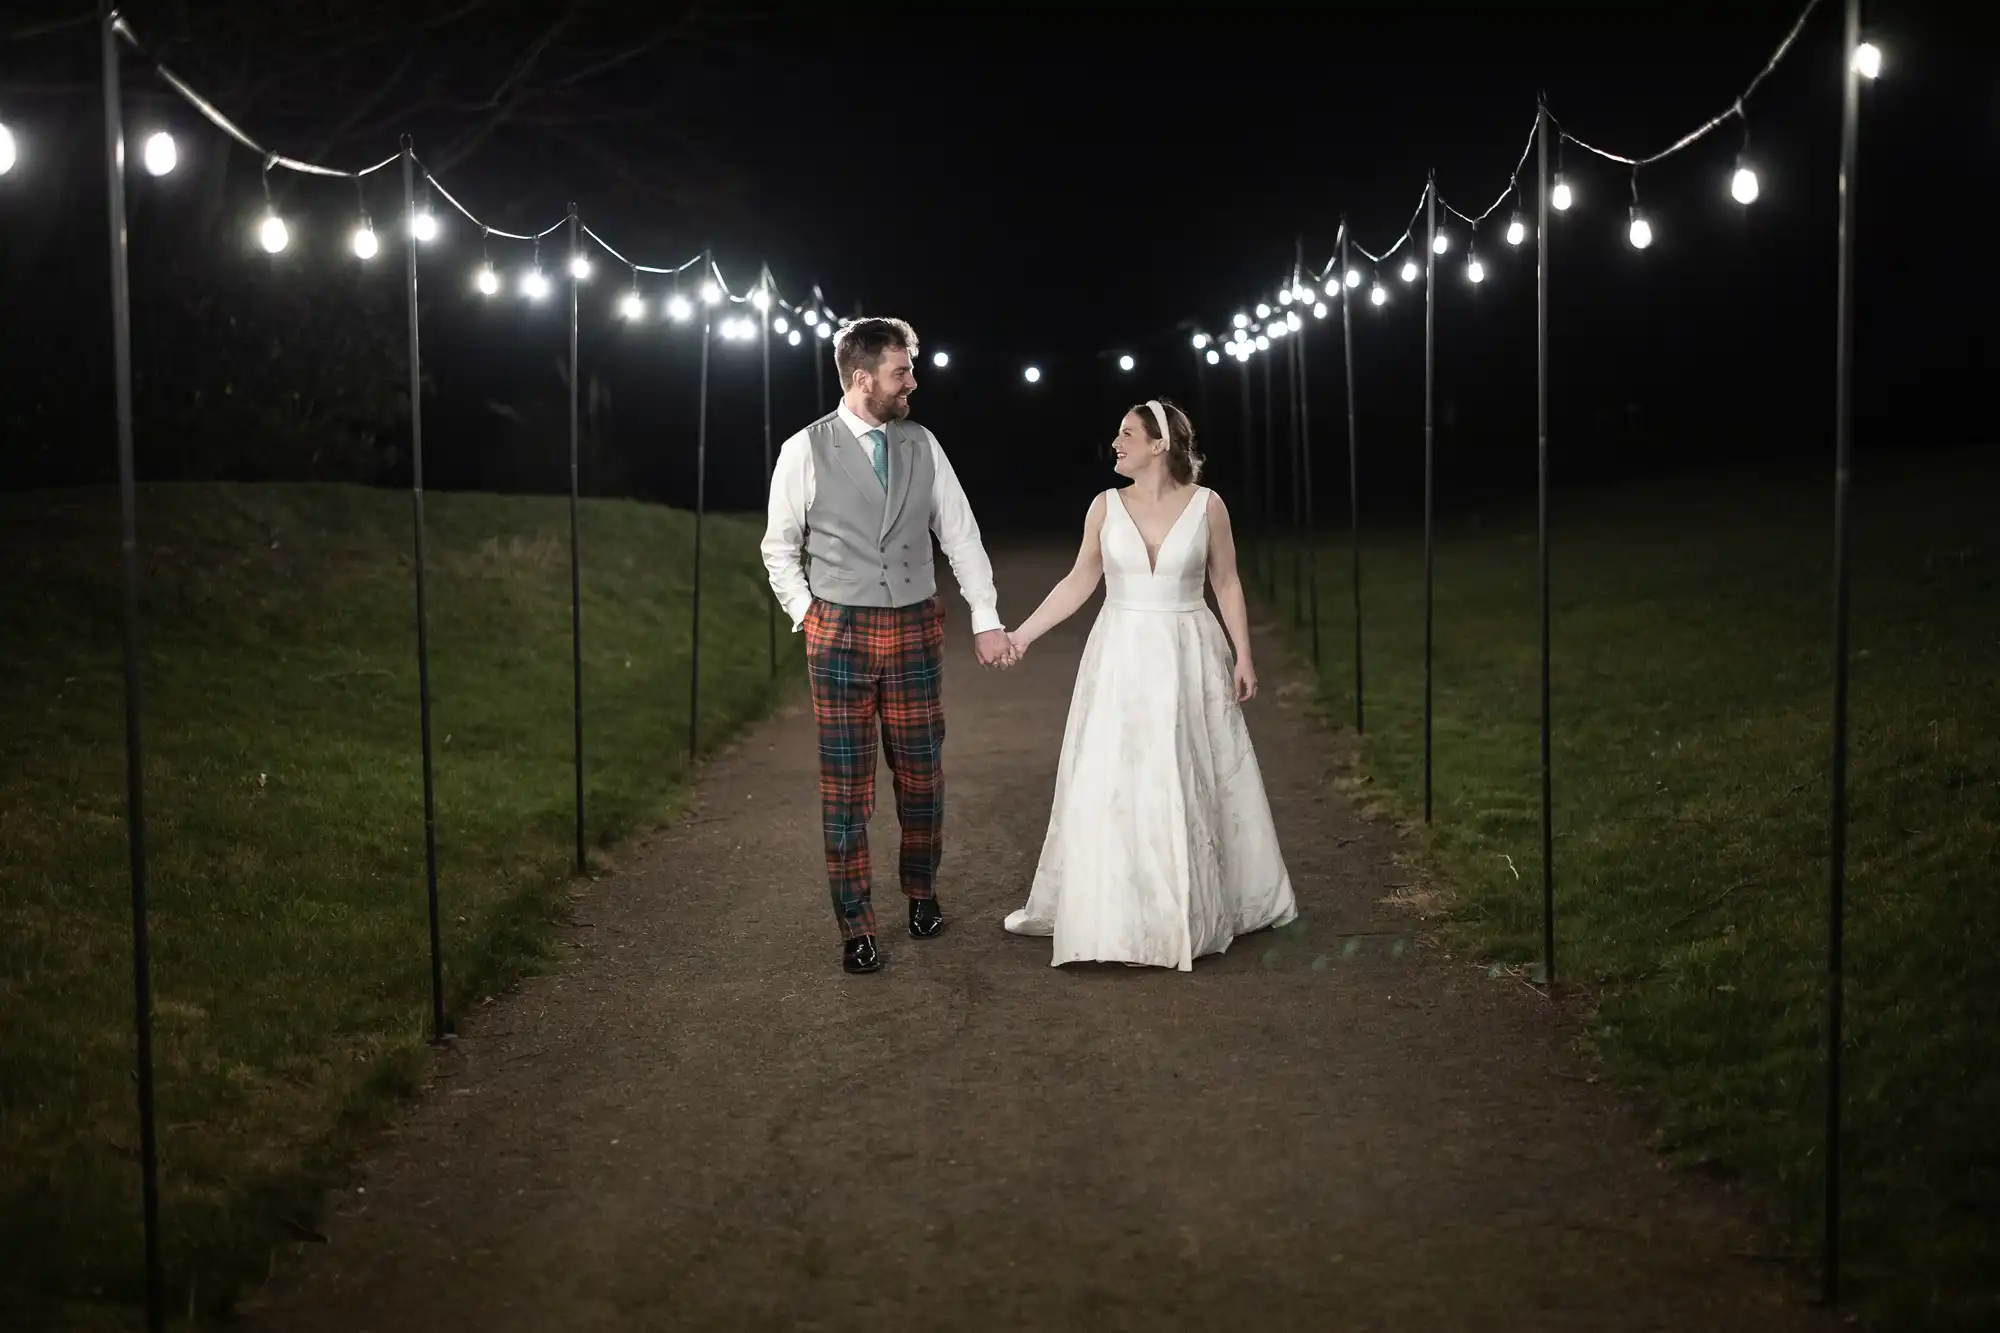 A couple holds hands while walking down an outdoor path at night, illuminated by string lights. The man wears a vest and plaid pants, and the woman wears a white dress.